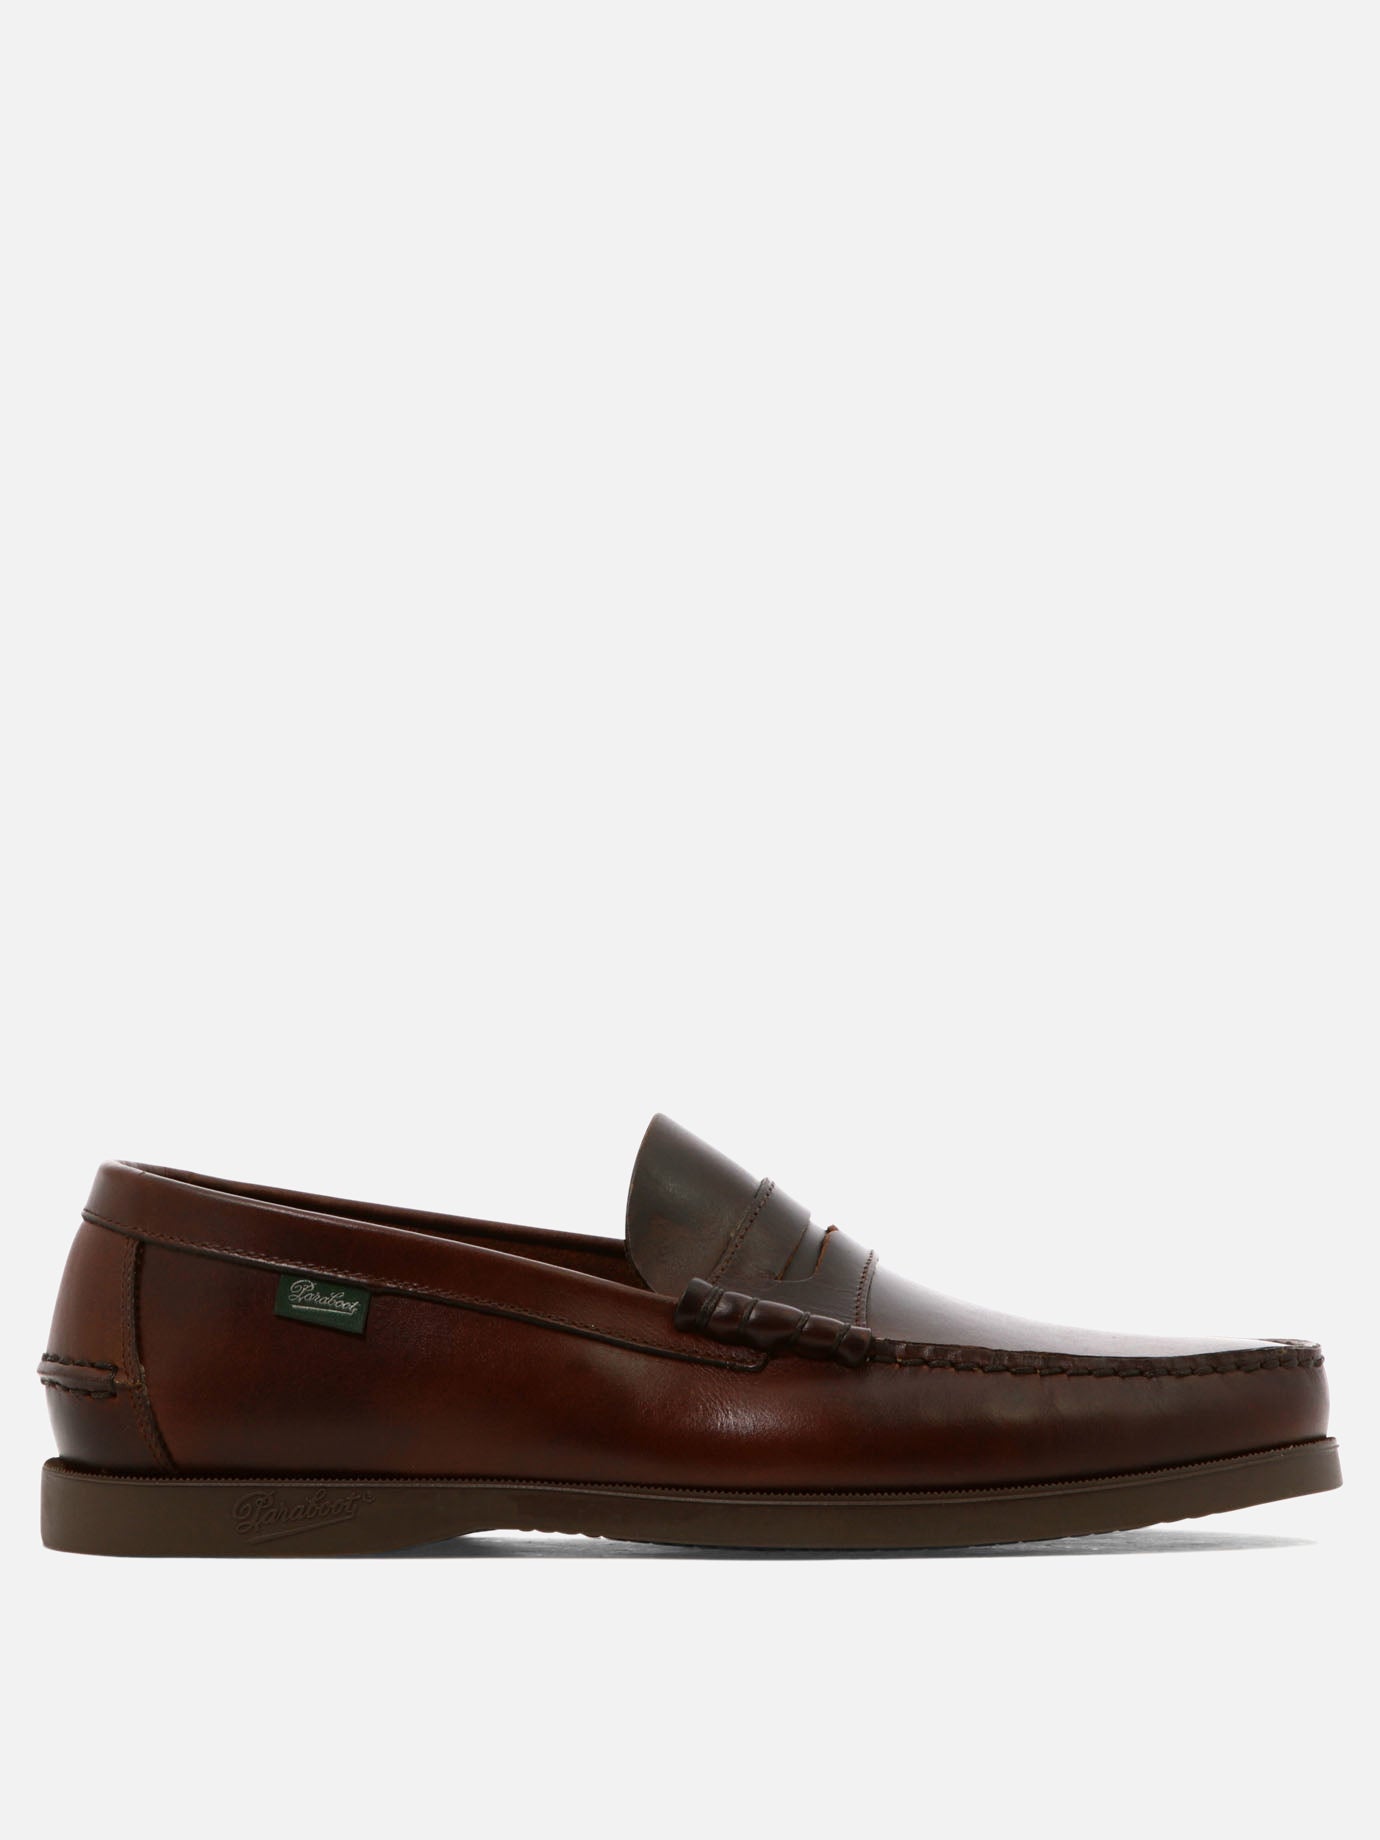 "Coraux" loafers